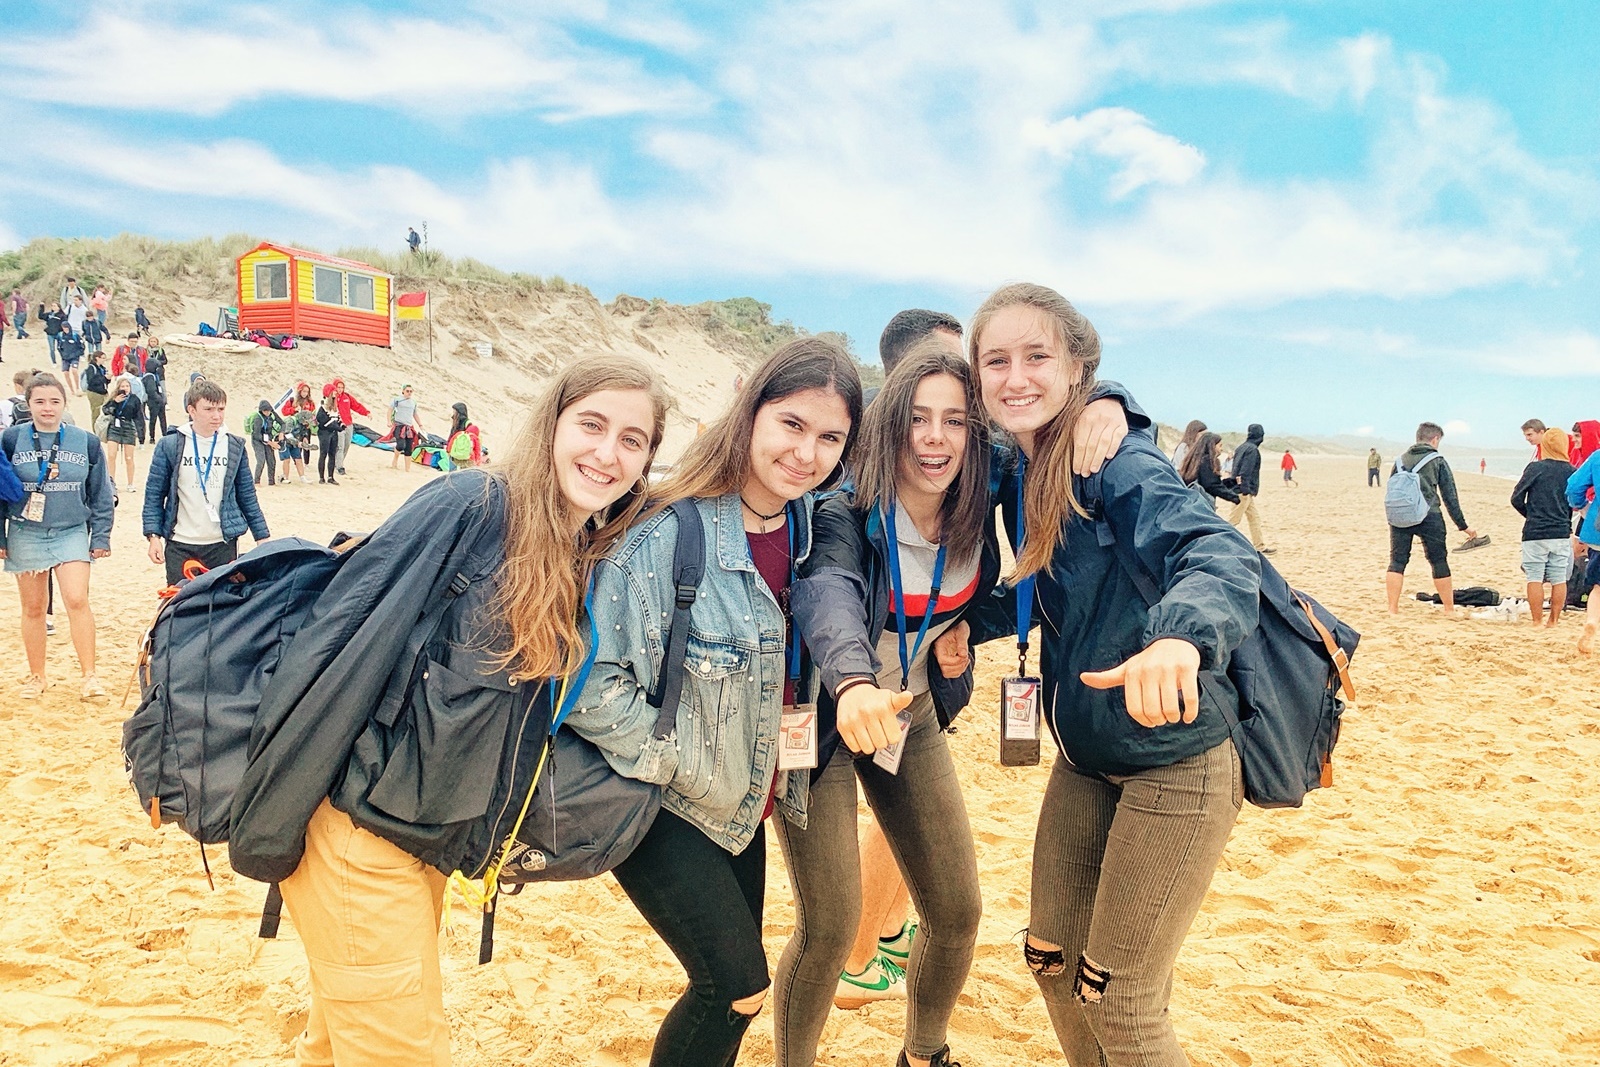 Atlas Junior young learner students having fun during a trip to the beach in Dublin